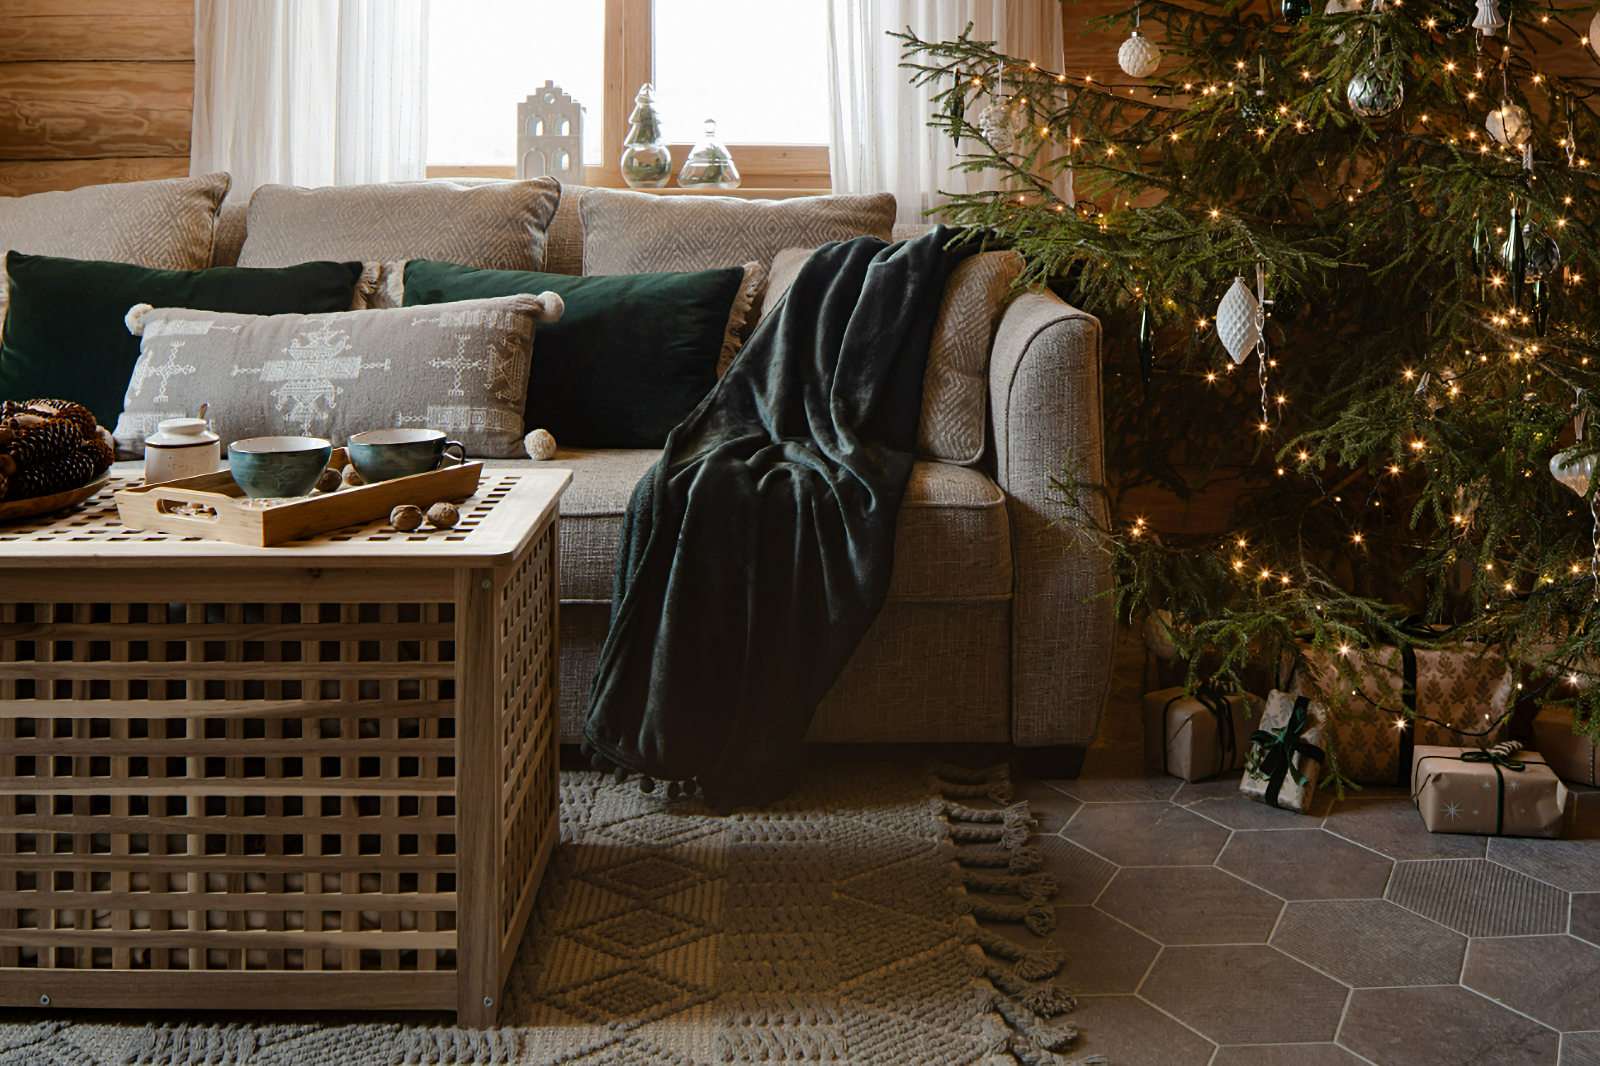 Cozy cabin living room decorated for Christmas